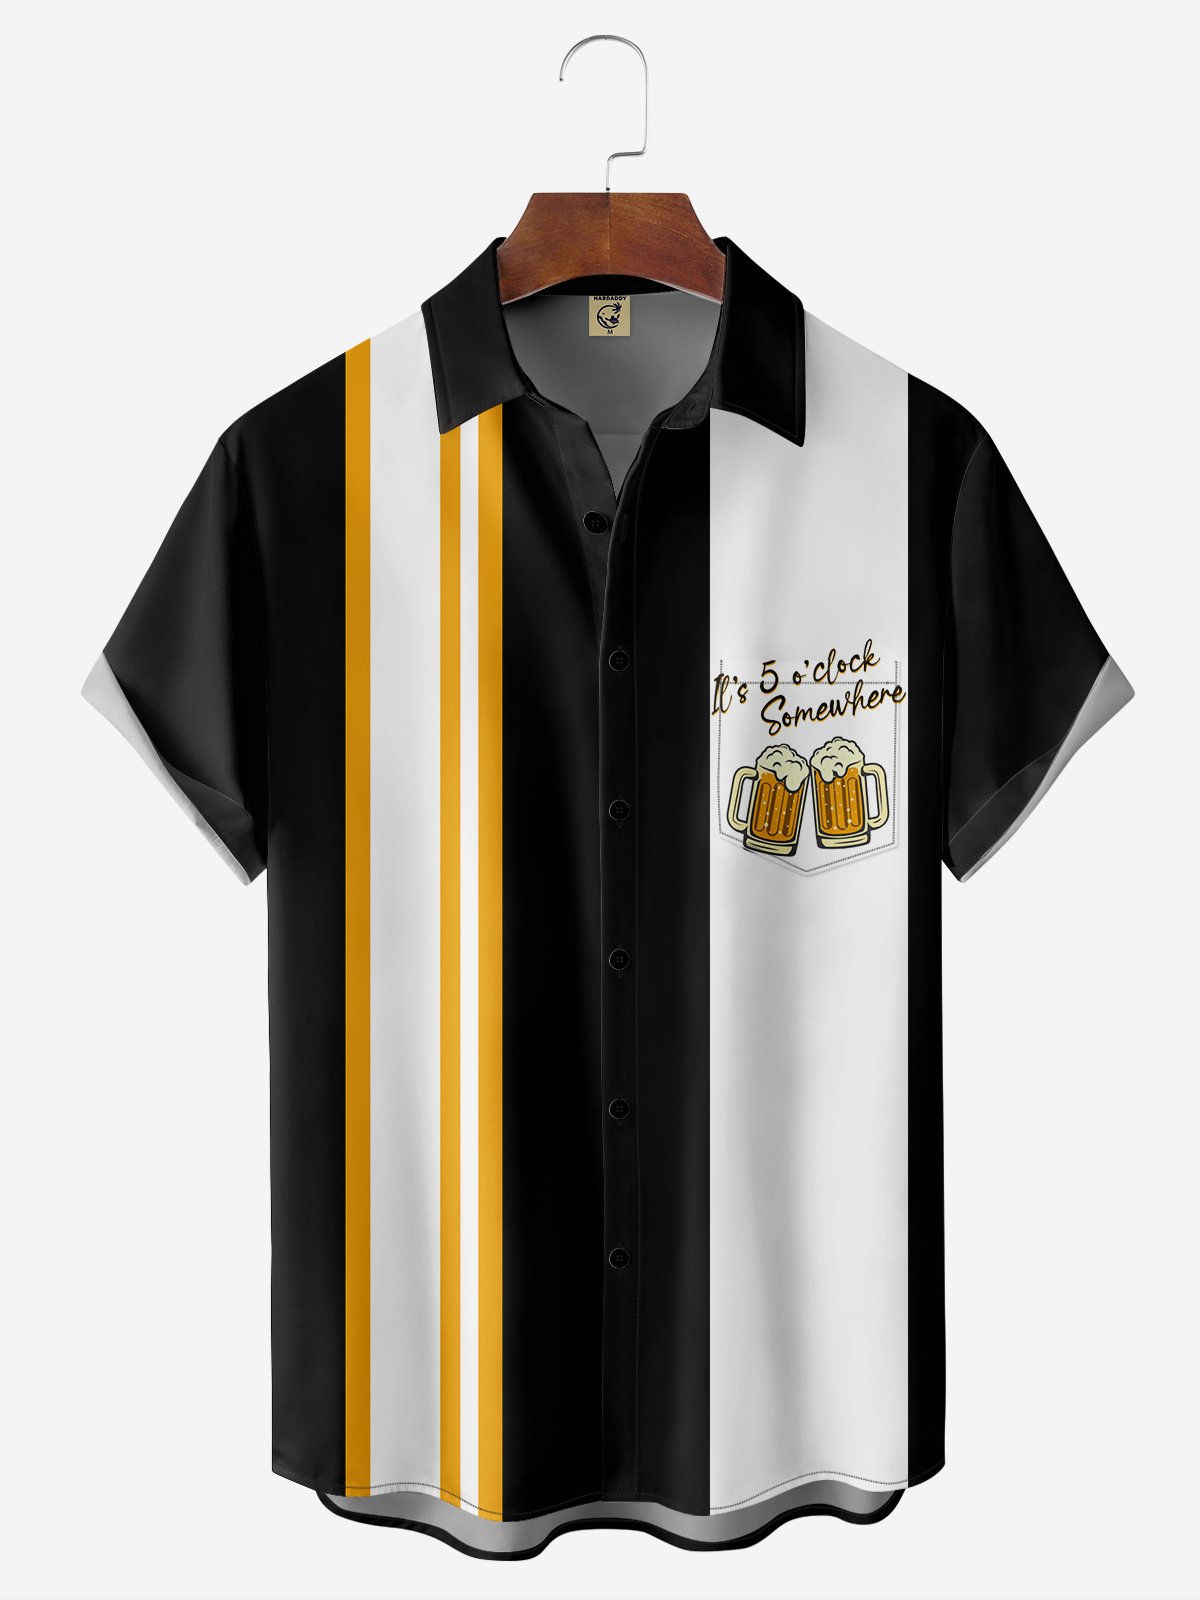 Hardaddy Moisture-wicking?Breathable?Beer?Bowling?Shirt